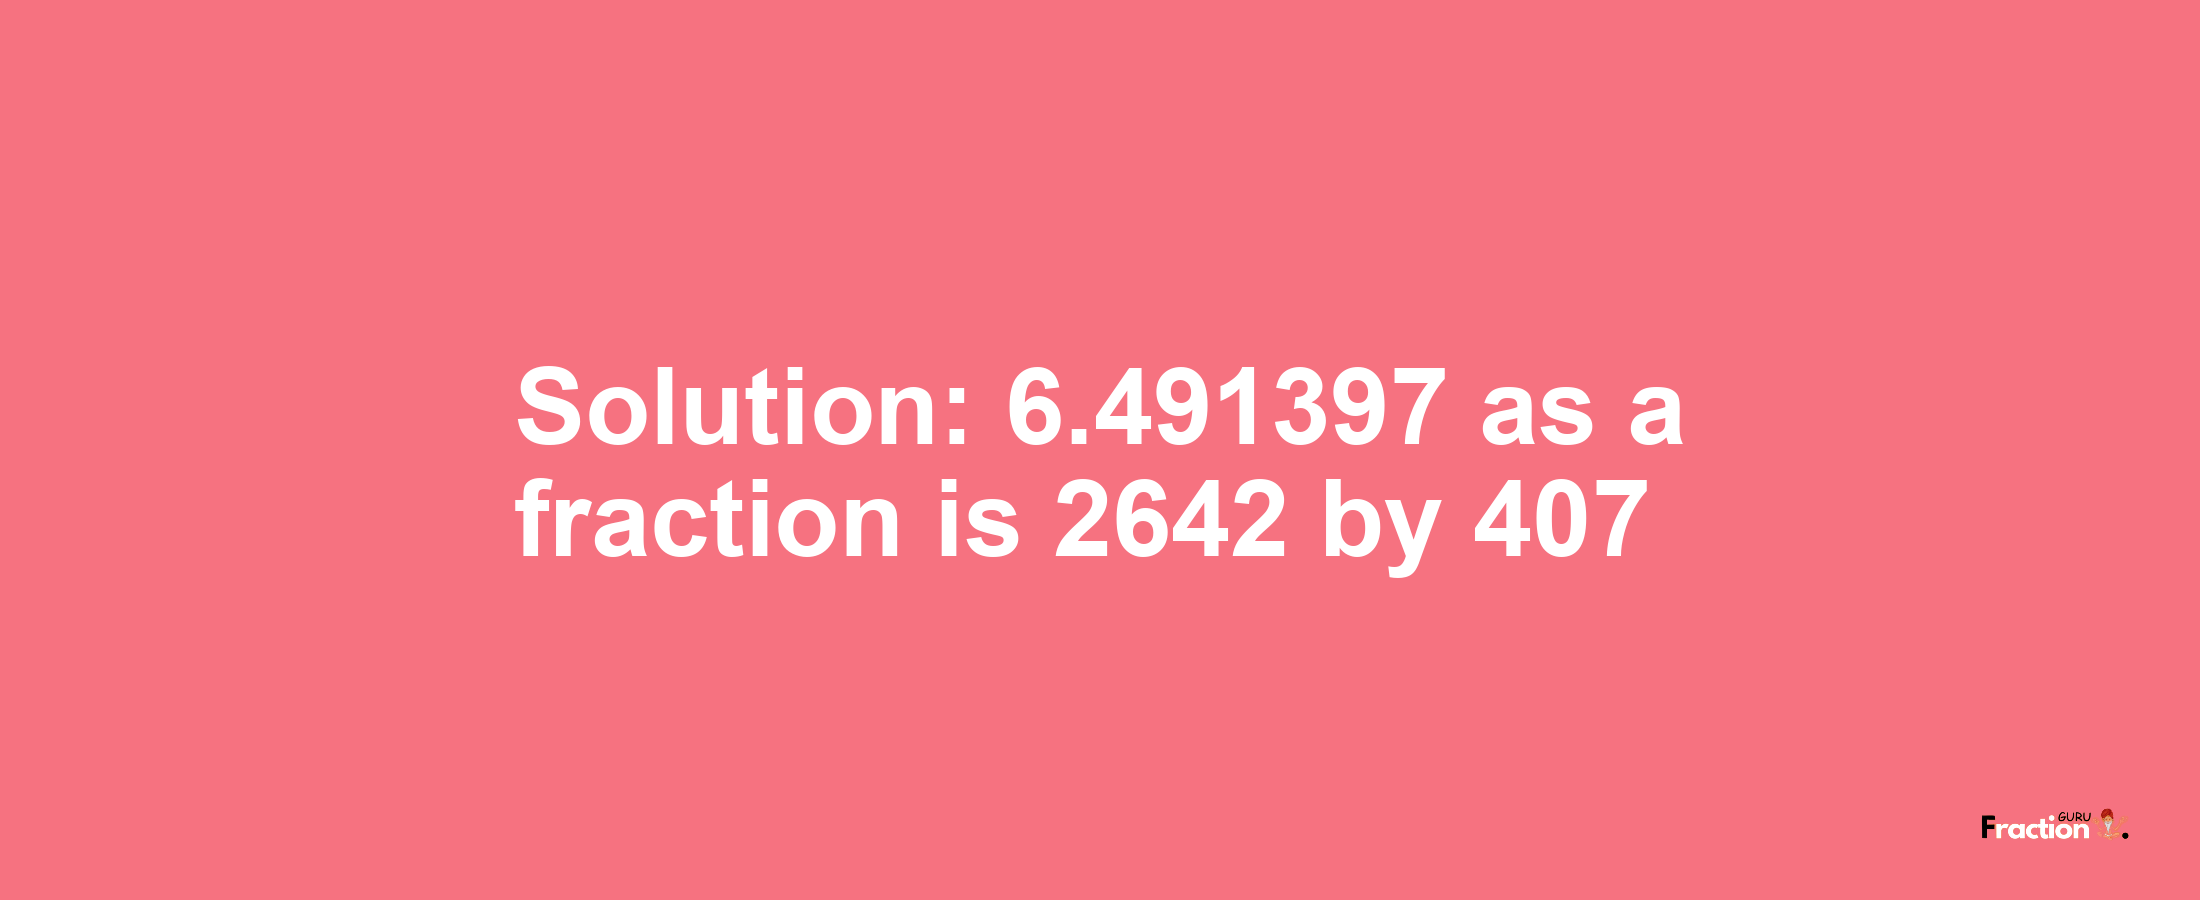 Solution:6.491397 as a fraction is 2642/407